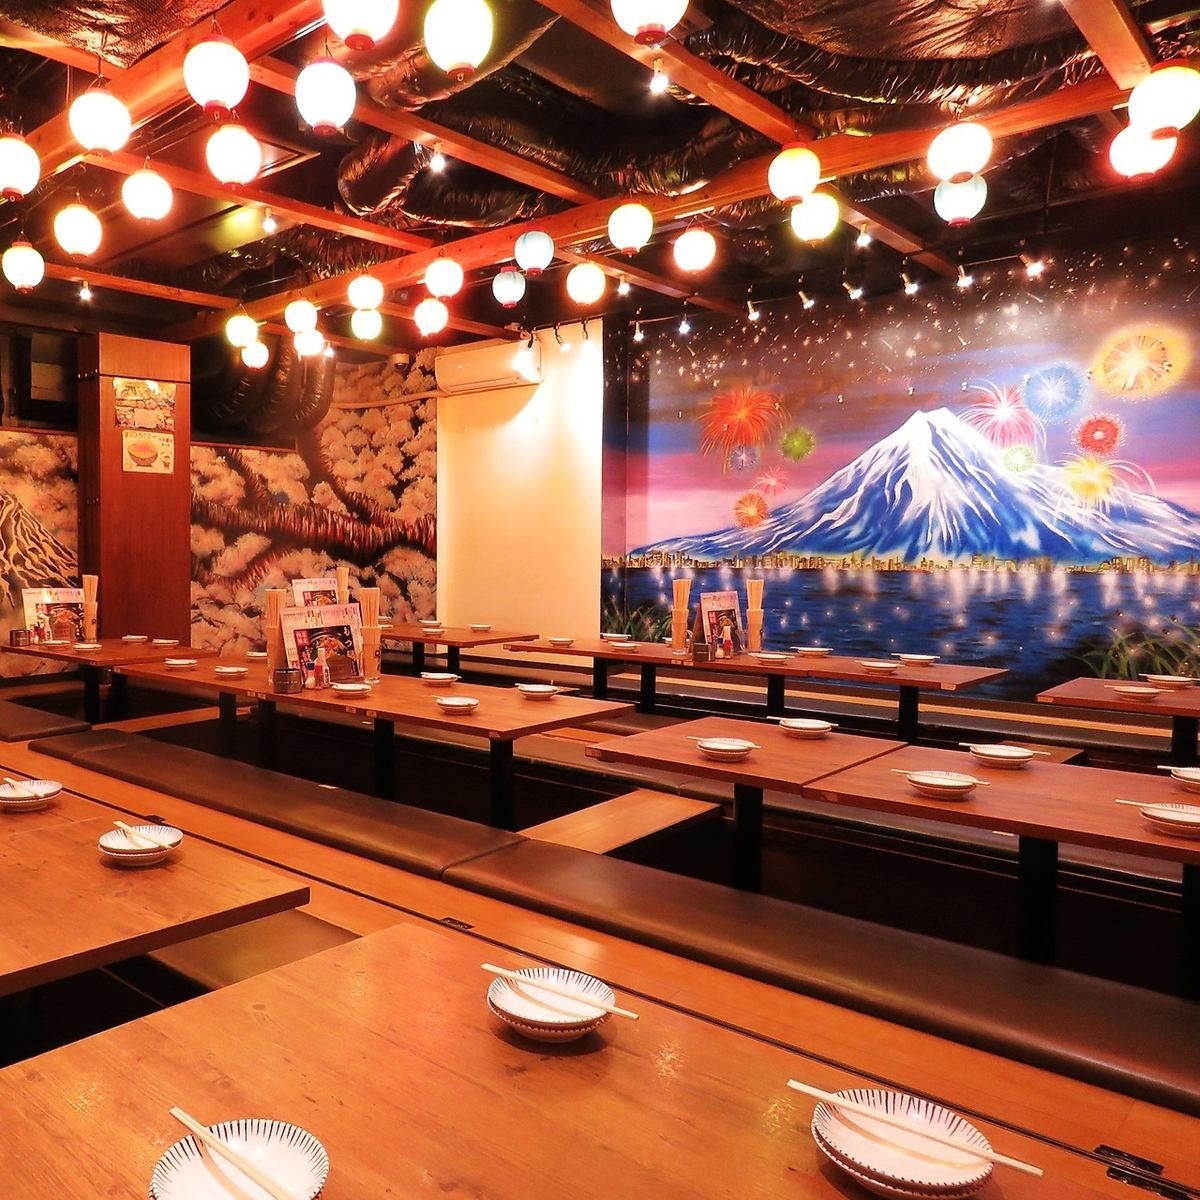 Banquets can accommodate up to 68 people! Large company banquets are no problem at Mochibachan!